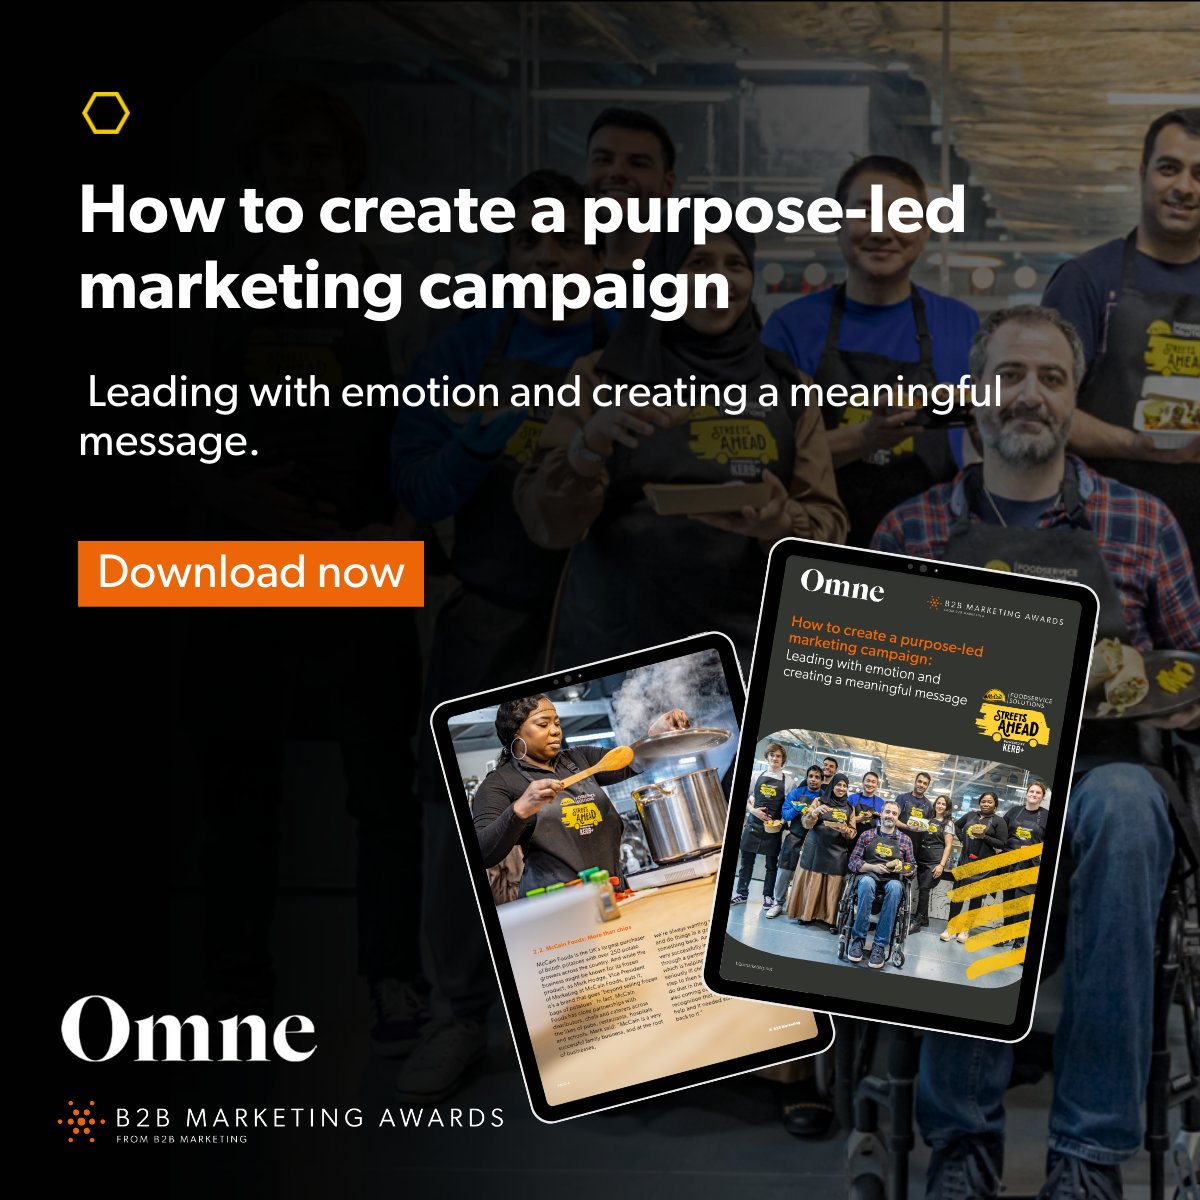 Omne, teamed up with McCain Foods to deliver an exceptional street food focused campaign. In fact, they scooped up the Bronze for ‘Best purpose-led marketing program’ for its ‘Streets Ahead’ initiative at our 2023 #B2BMarketingAwards. Learn more here: okt.to/Kh3Gwu